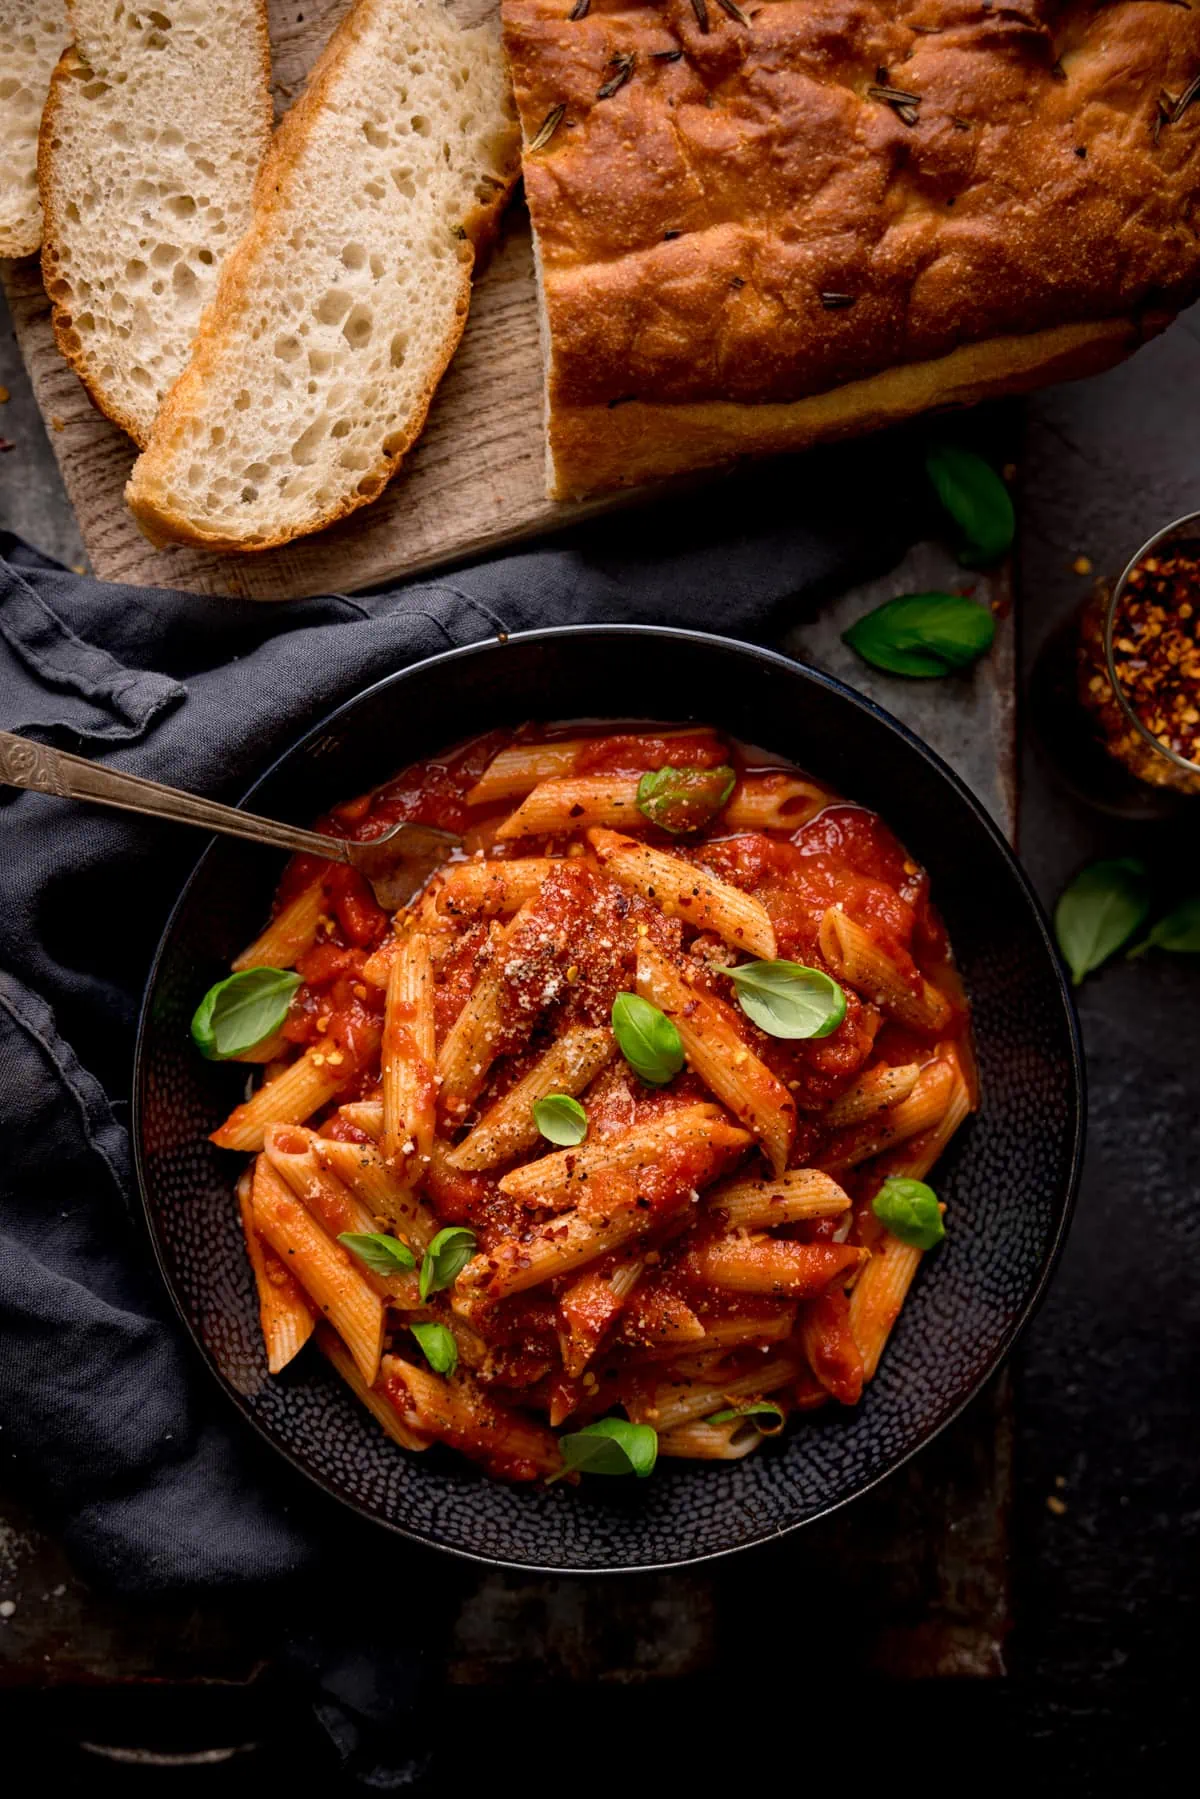 Overhead image of a black bowl filled with penne arrabiata, with fresh baby basil leaves sprinkled on top. There is a fork sticking out of the bowl. The bowl is in a dark surface and there is a loaf of bread with a couple of sliced pieces at the top of the frame.